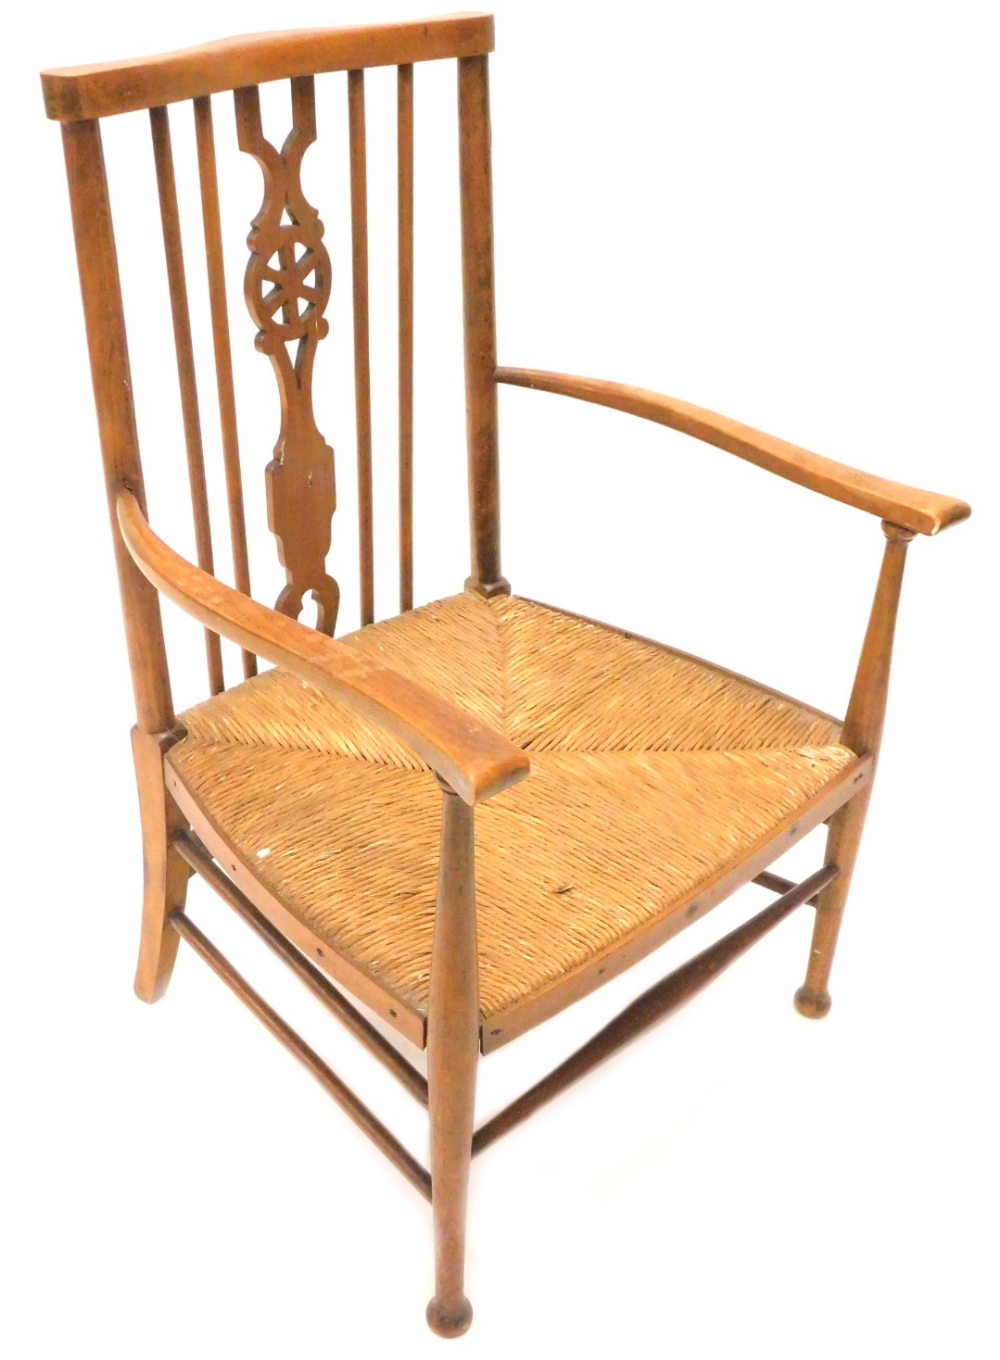 A late 19thC beech open armchair, in the Arts and Crafts style, with a pierced splat and rush seat.